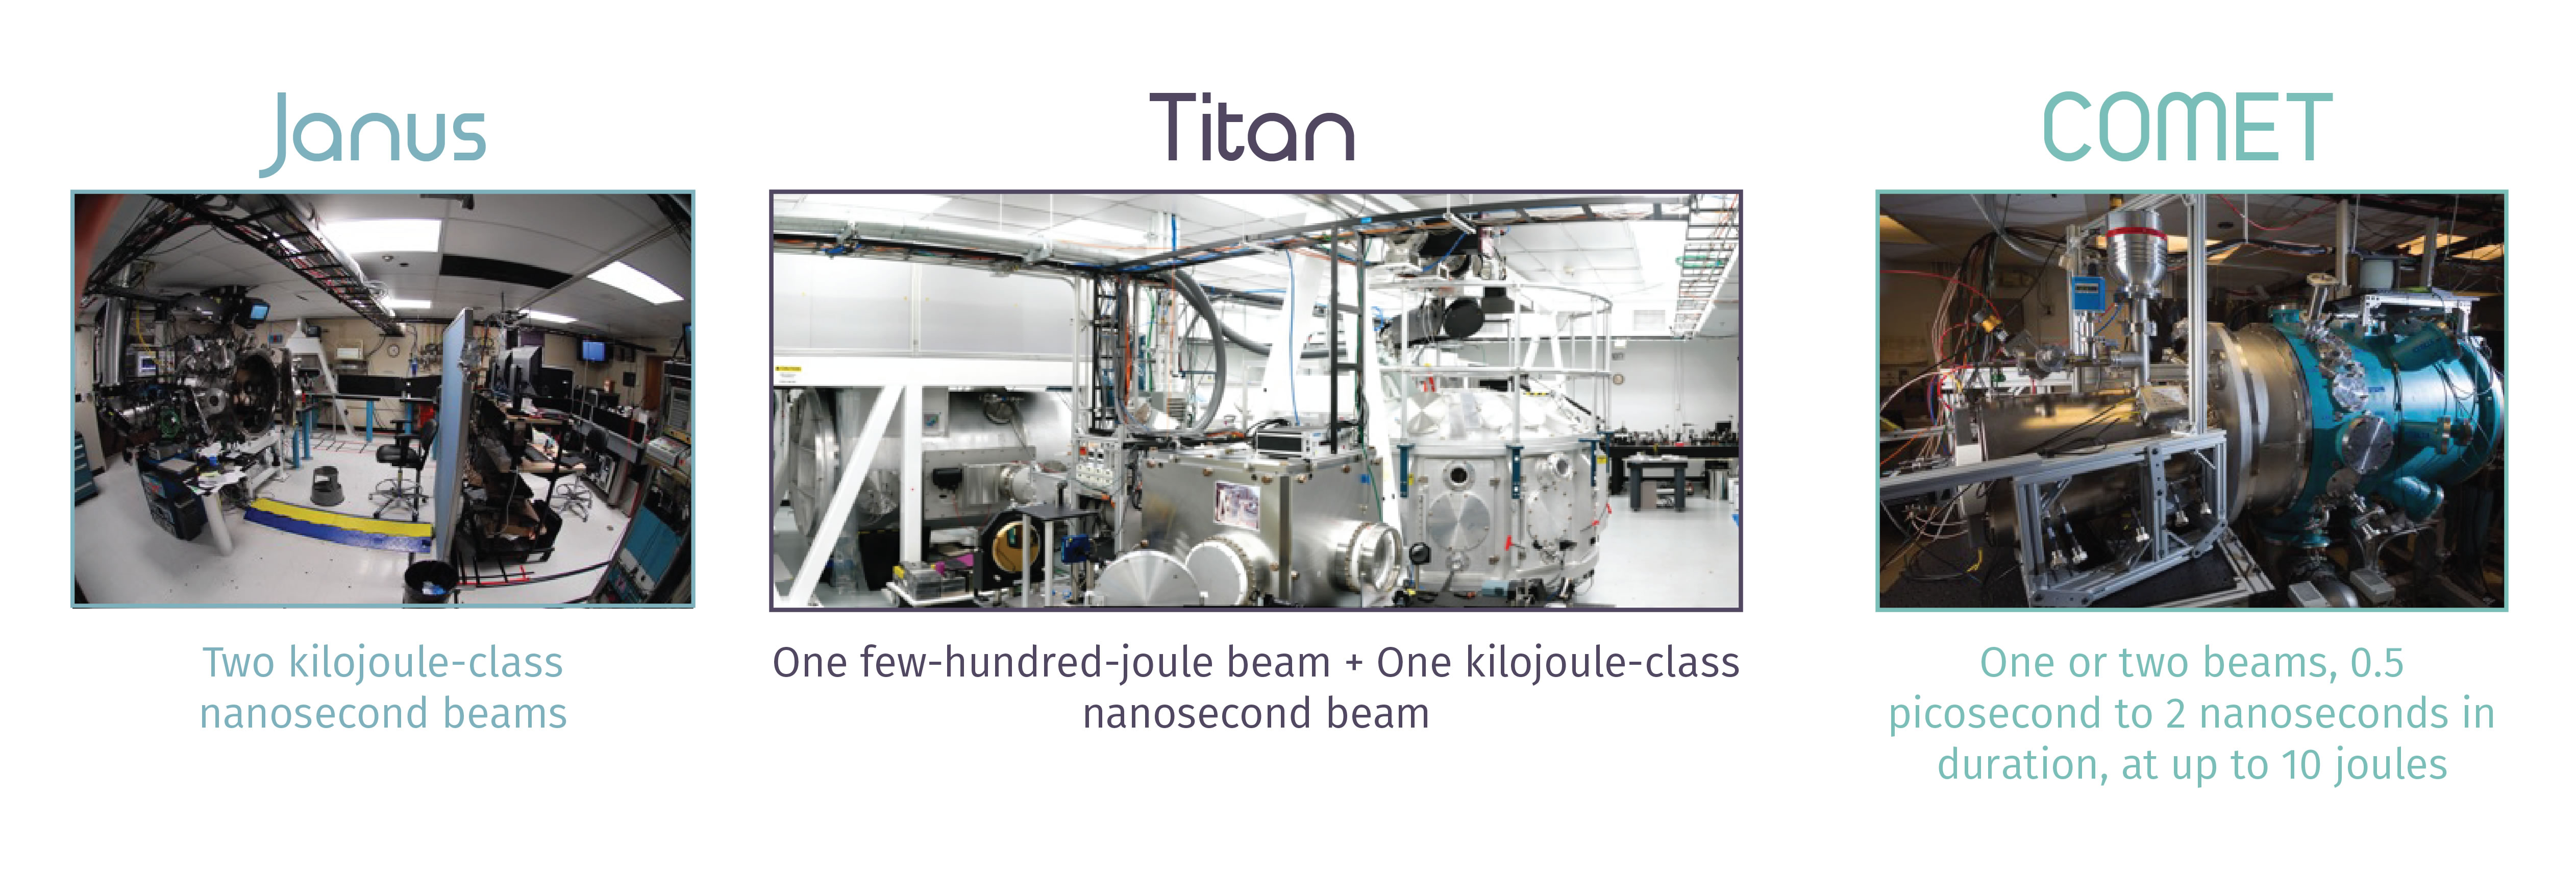 An image and description for each of the three lasers: Janus, Titan, and Comet.